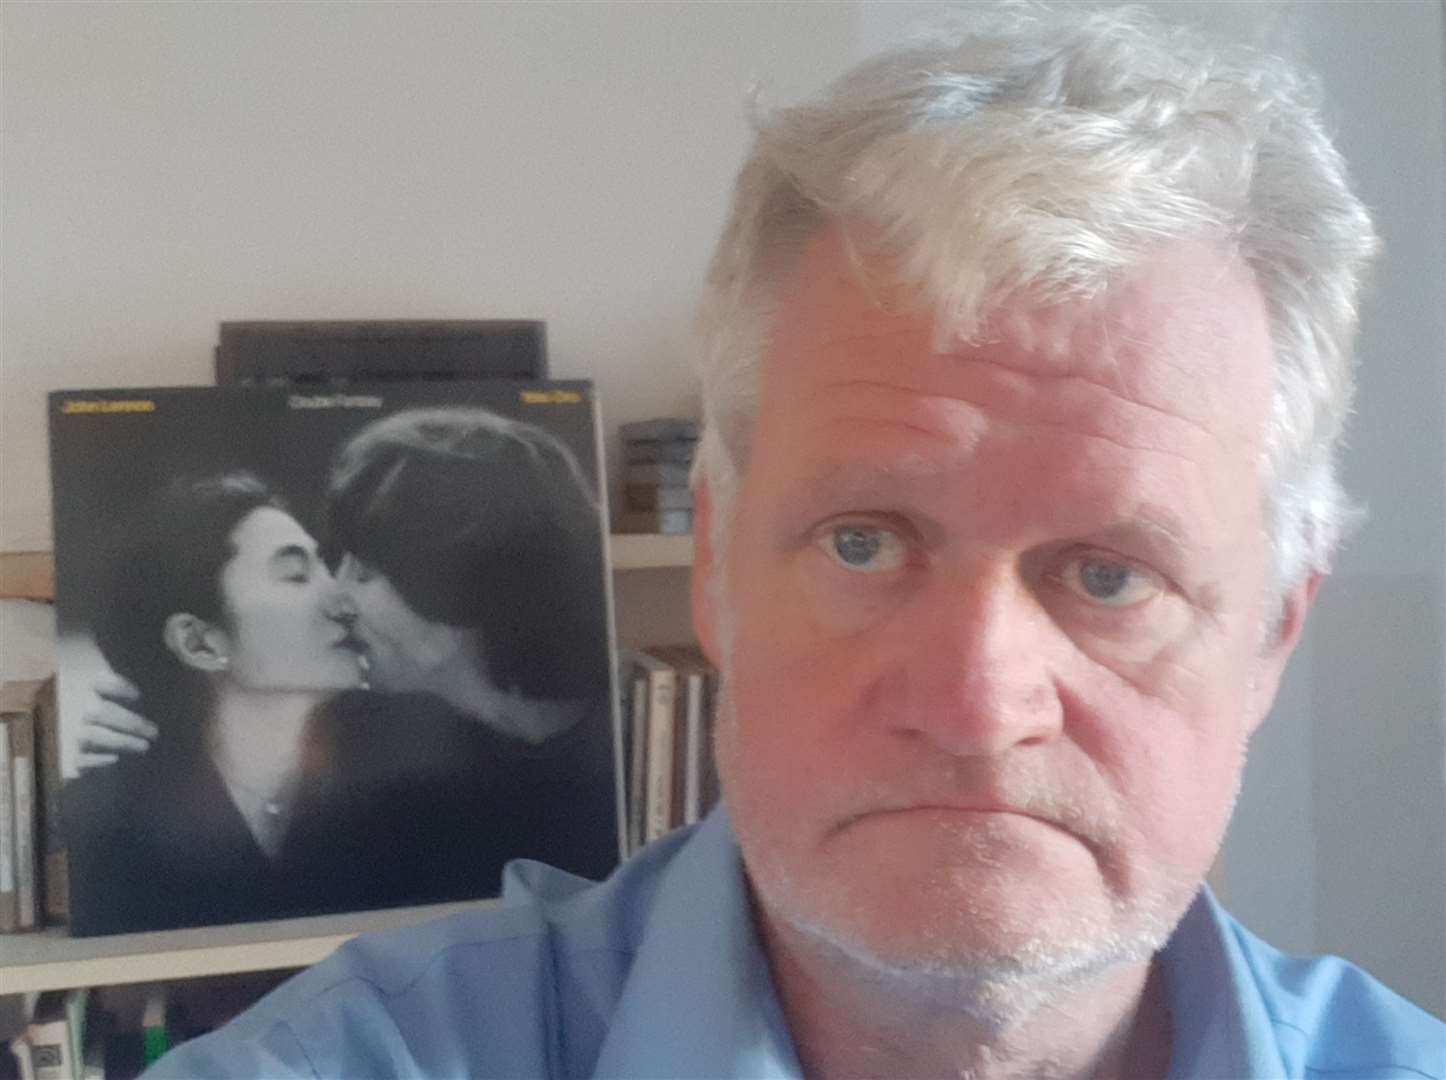 Sam today with his copy of the last record in John Lennon's lifetime, Double Fantasy